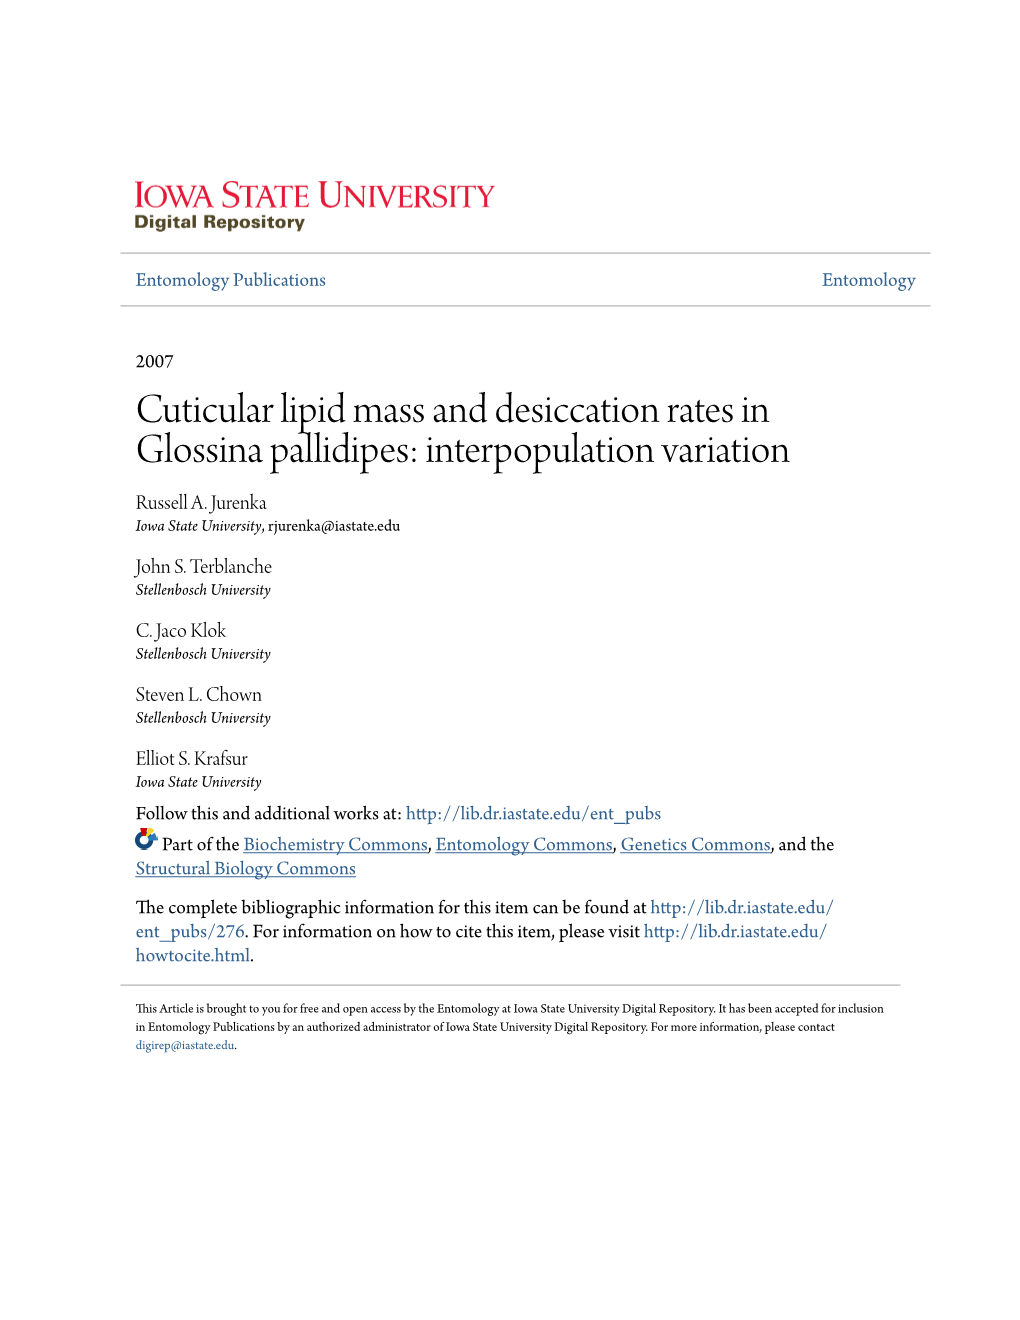 Cuticular Lipid Mass and Desiccation Rates in Glossina Pallidipes: Interpopulation Variation Russell A